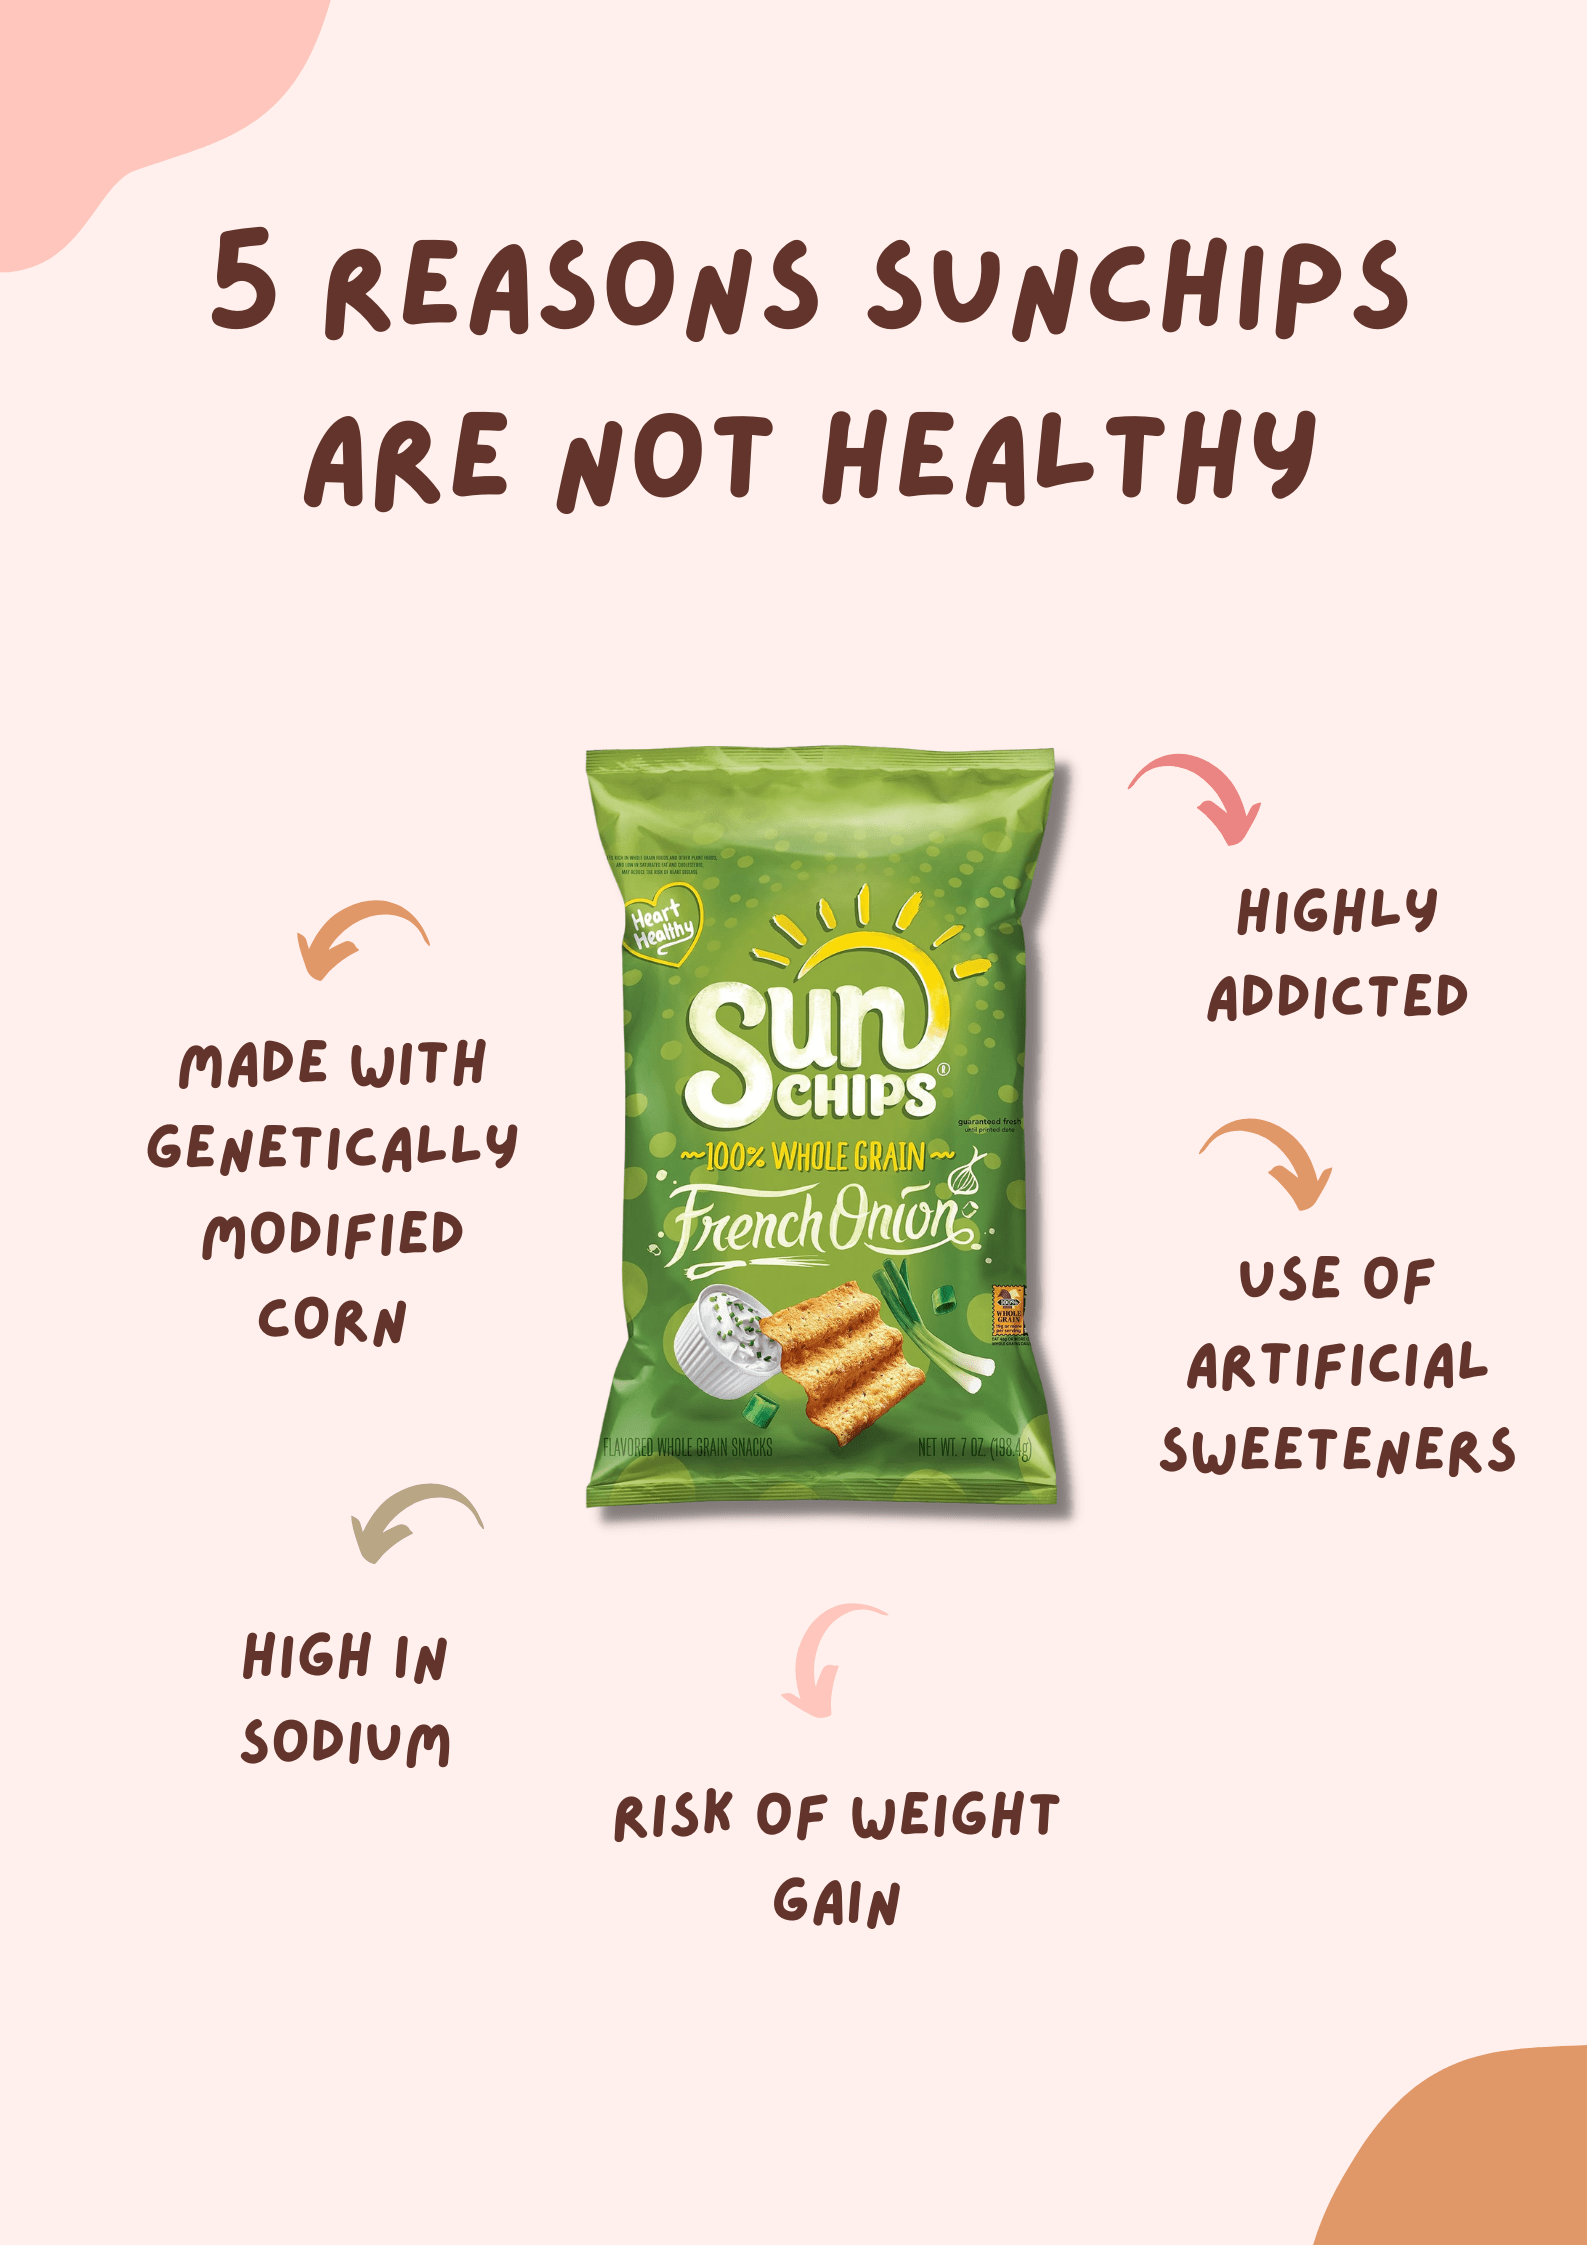 5 Reasons sunchips are not healthy